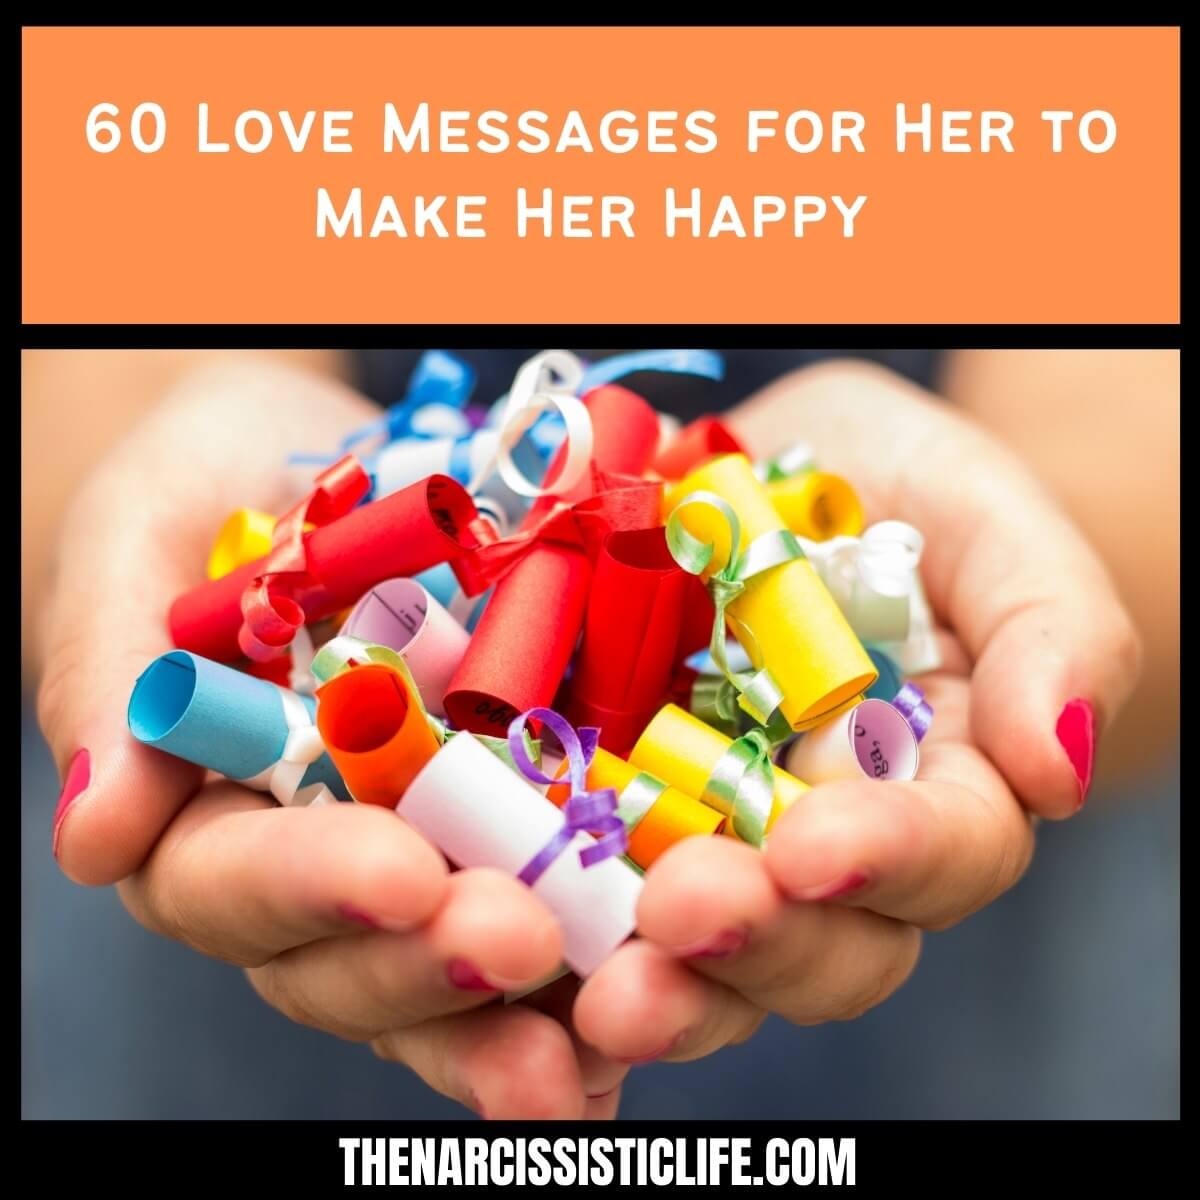 60 Love Messages for Her to Make Her Happy 